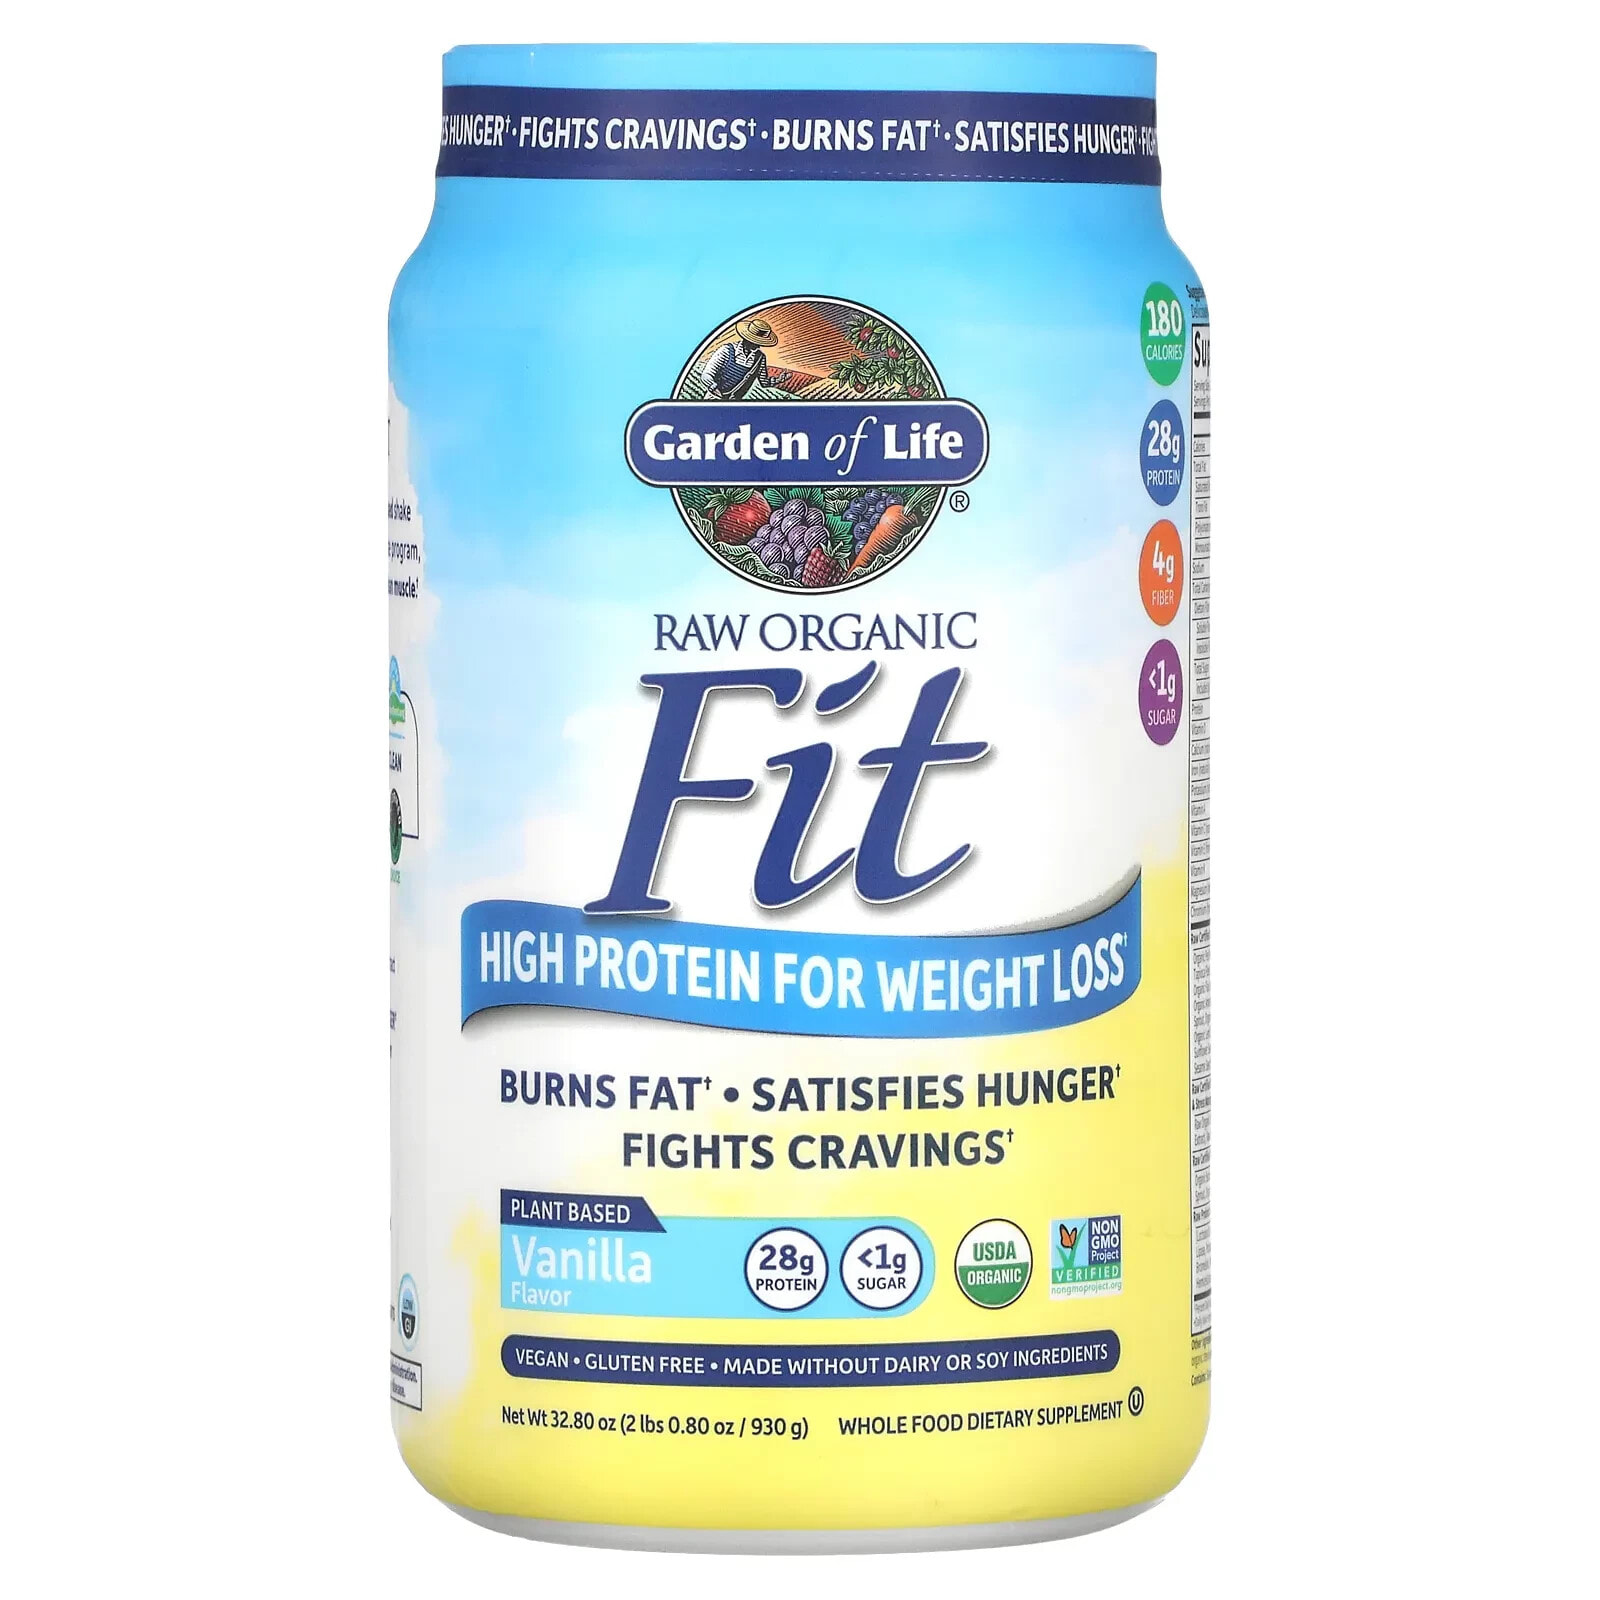 Garden of Life, RAW Organic Fit, High Protein for Weight Loss, Original, 1 lbs 15.39 oz (890 g)